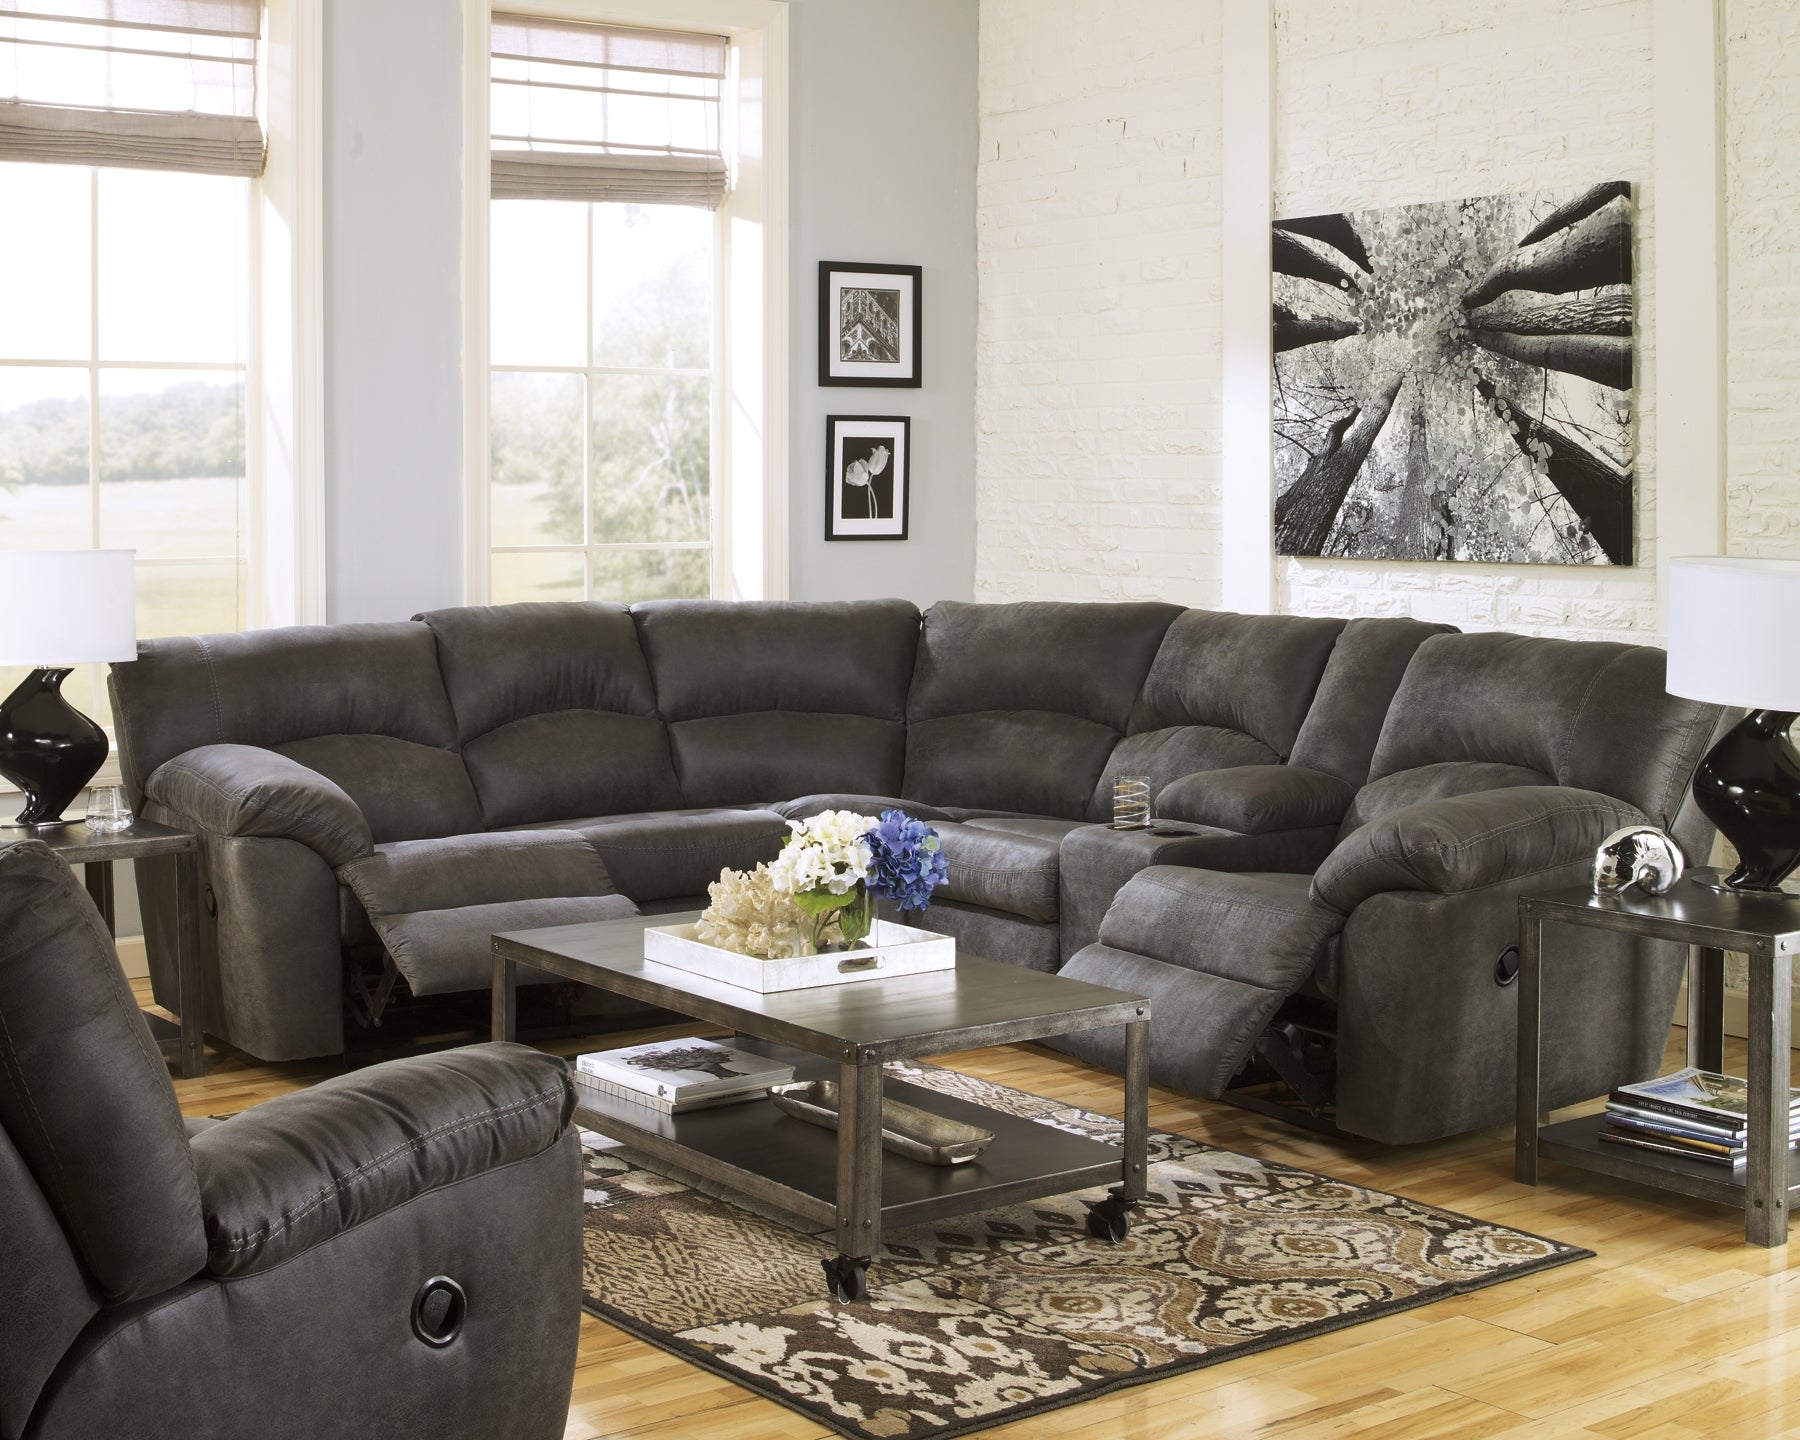 Tambo 2-Piece Reclining Sectional Signature Design by Ashley®